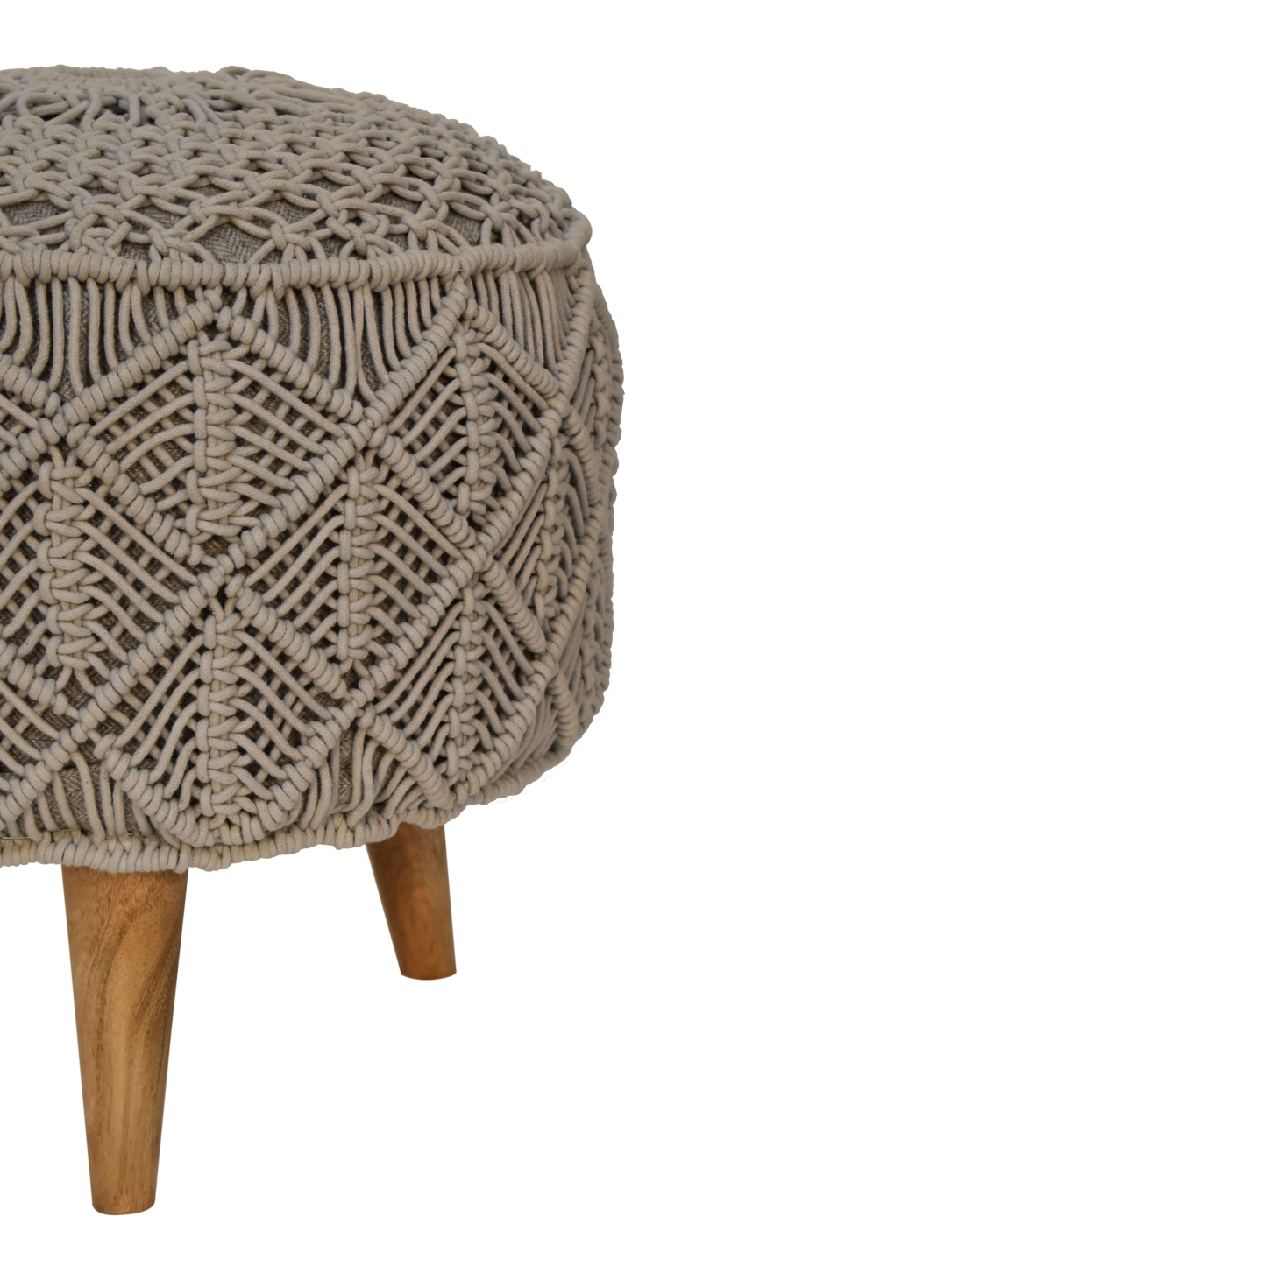 Grey Crotchet Round Footstool in Oak Finish With Luxurious Cotton Upholstery